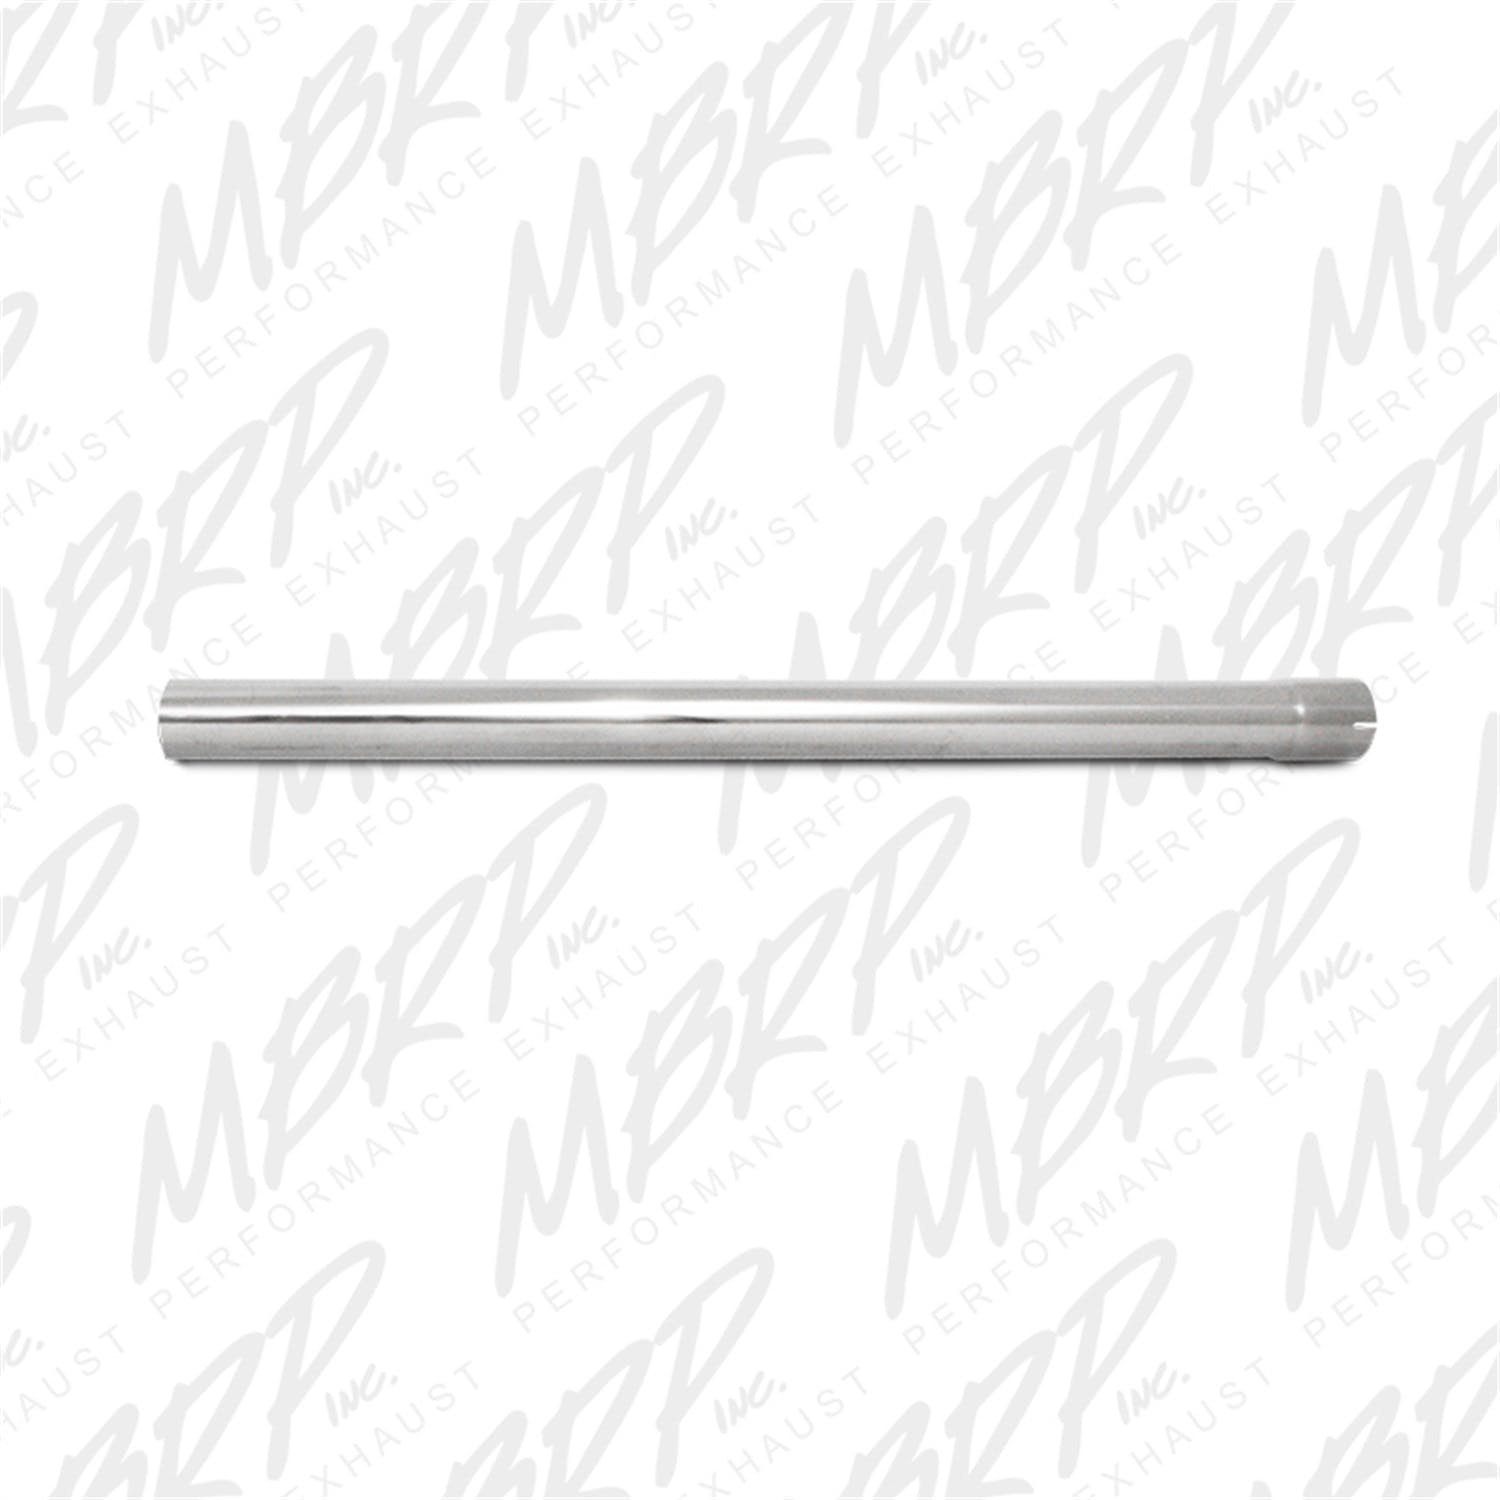 MBRP Exhaust GP5304 5in. Straight Tube; T304-90in. in length